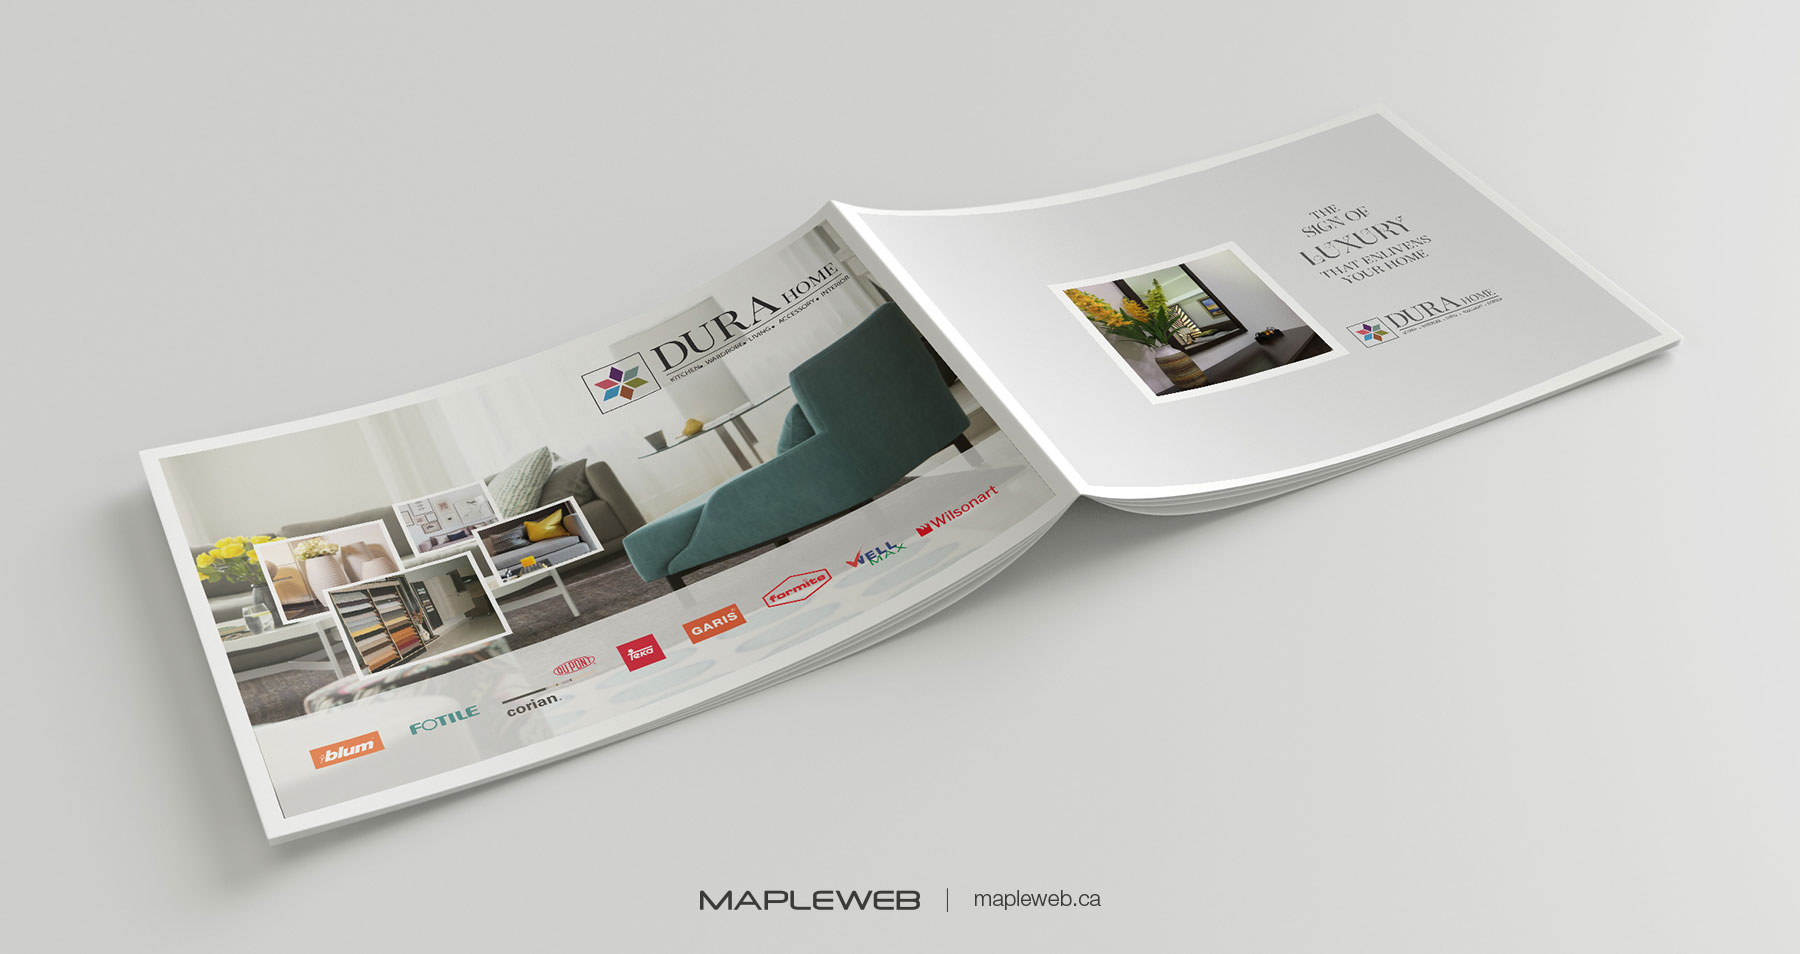 Dura Home Brand design by Mapleweb Photo Album Front and Last Page Displaying Design